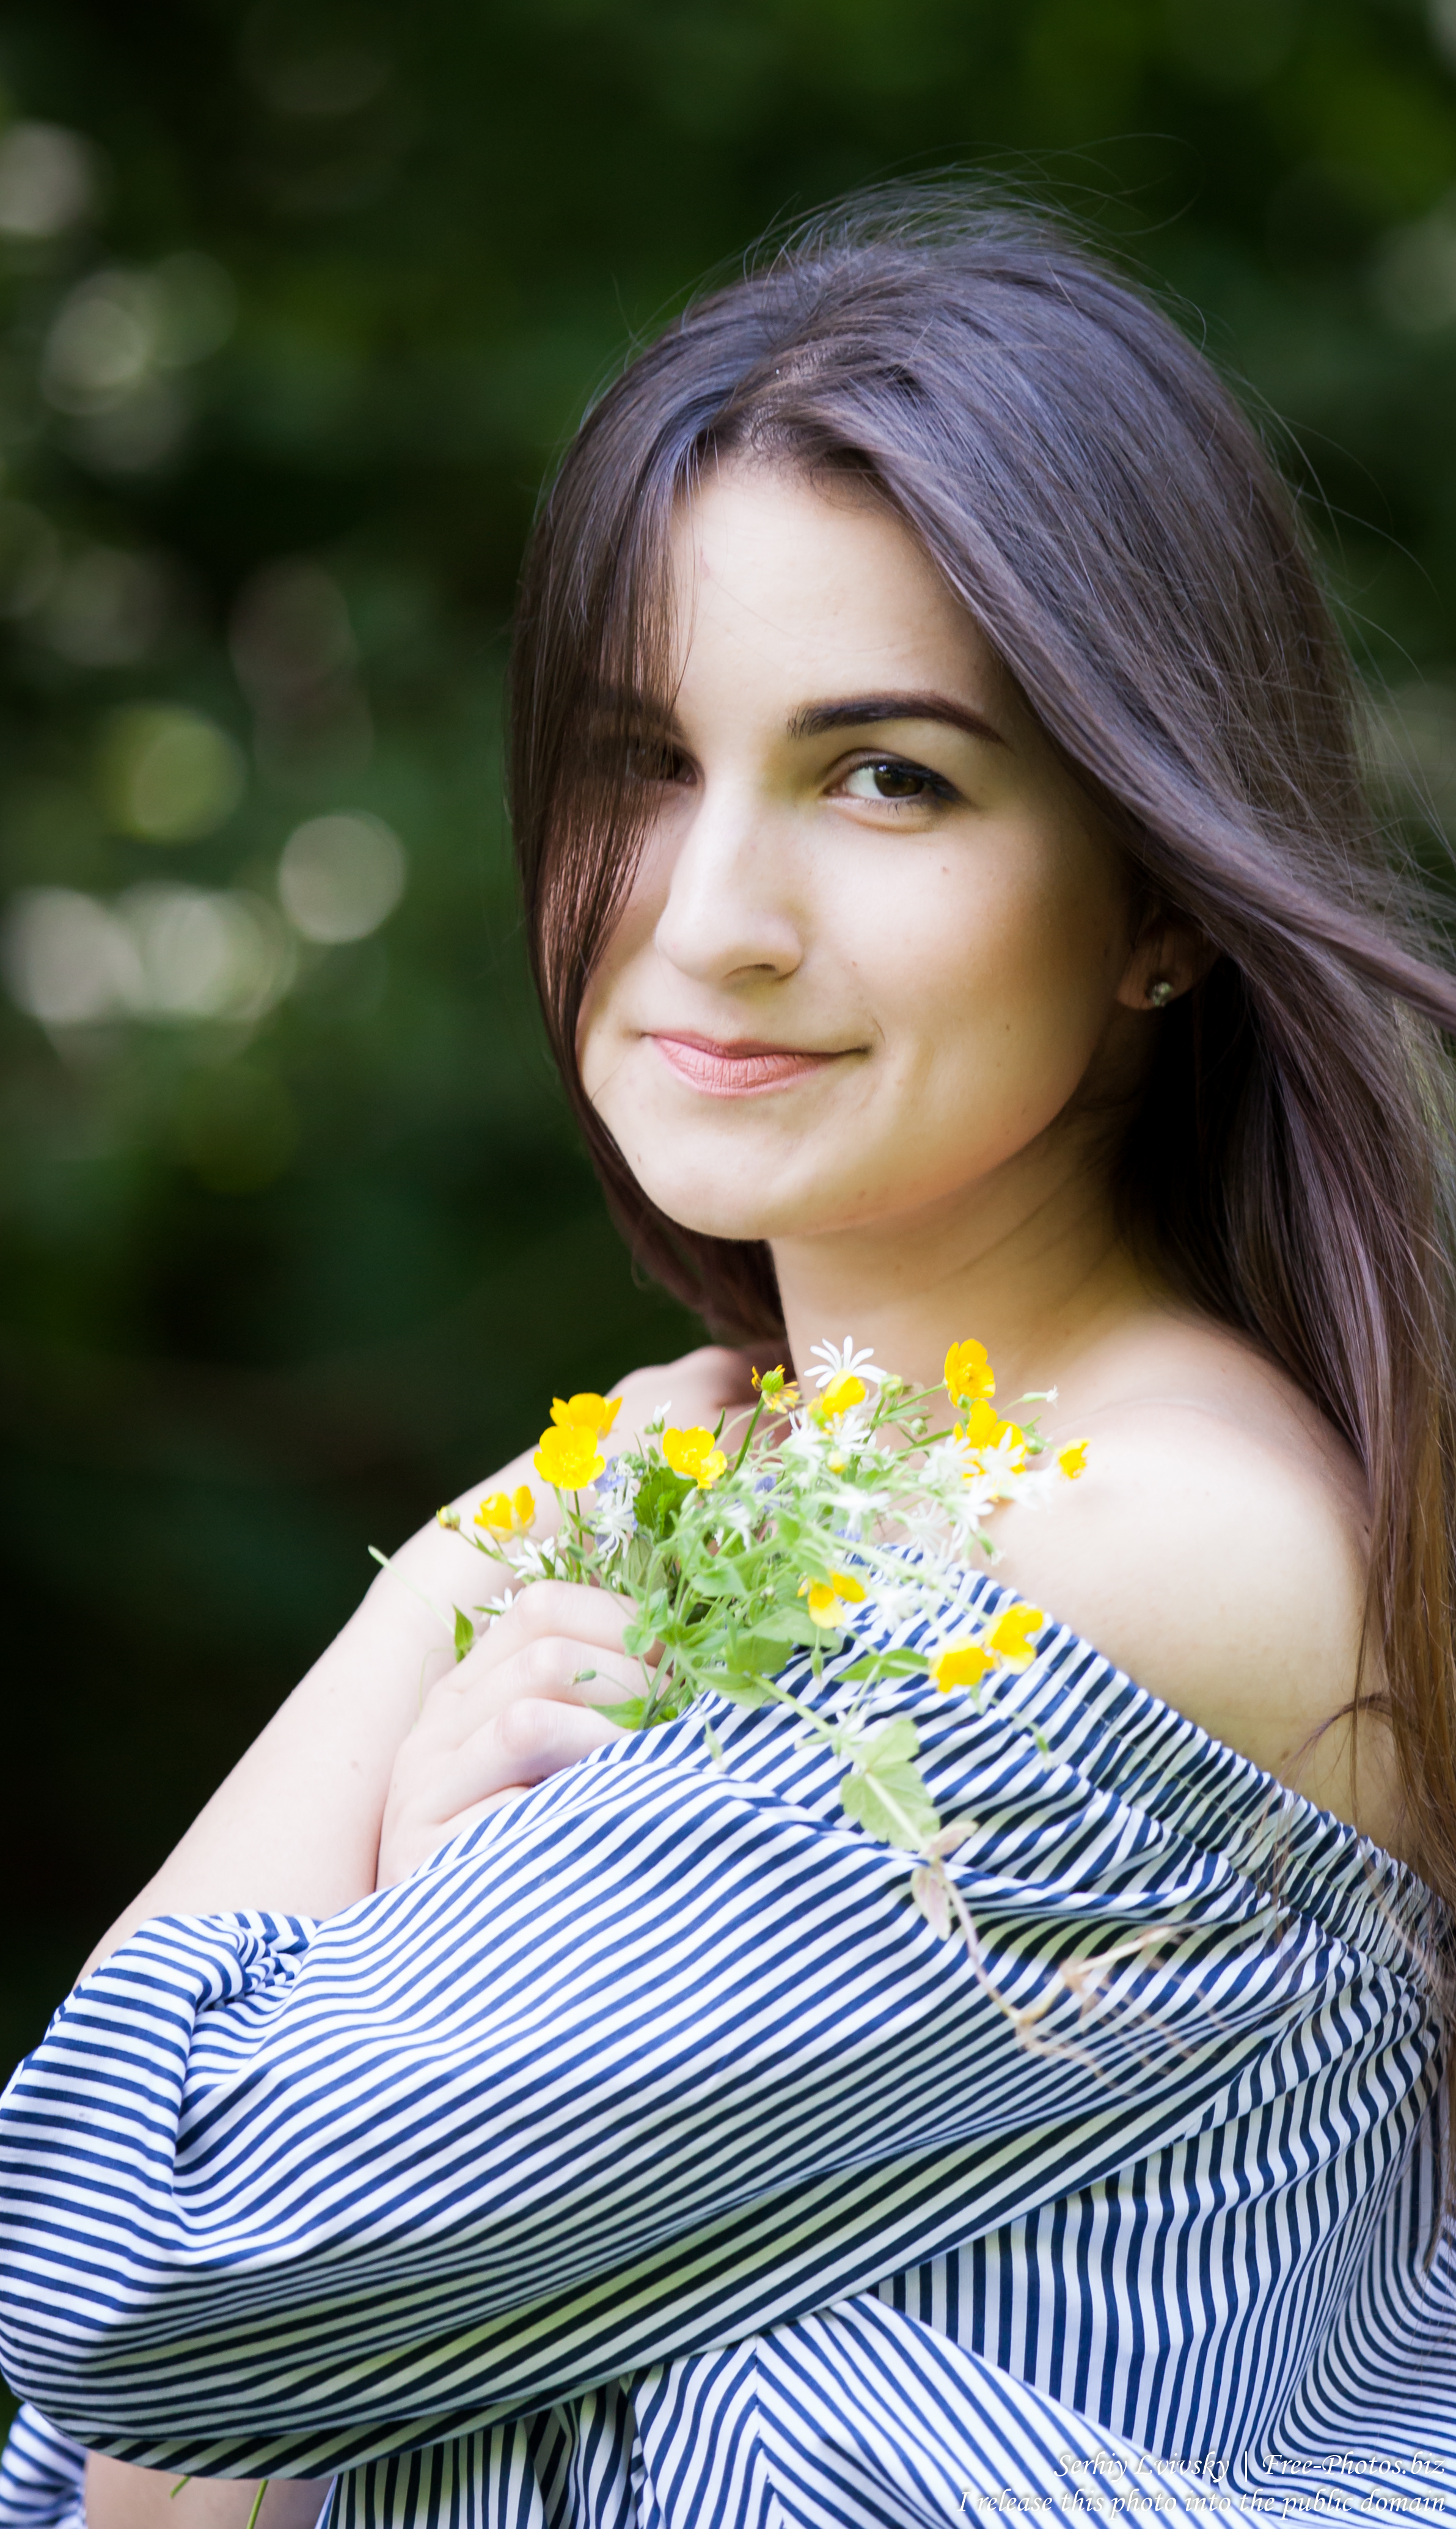 a 20-year-old Catholic girl photographed in May 2016 by Serhiy Lvivsky, picture 5